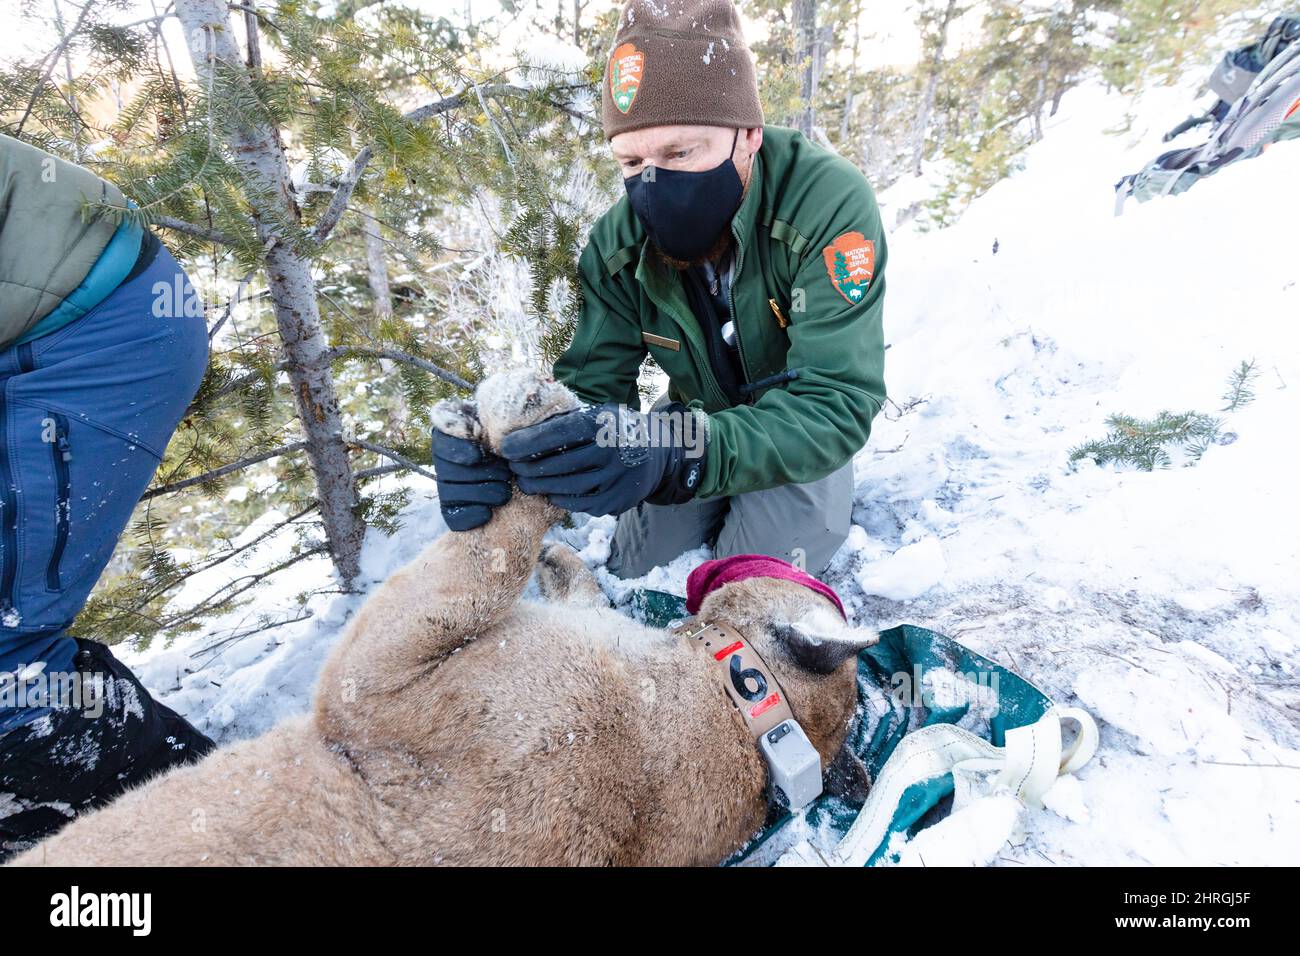 Park Service wildlife biologists check the health after adding a tracker to a male cougar captured in Yellowstone National Park, Wyoming. Stock Photo